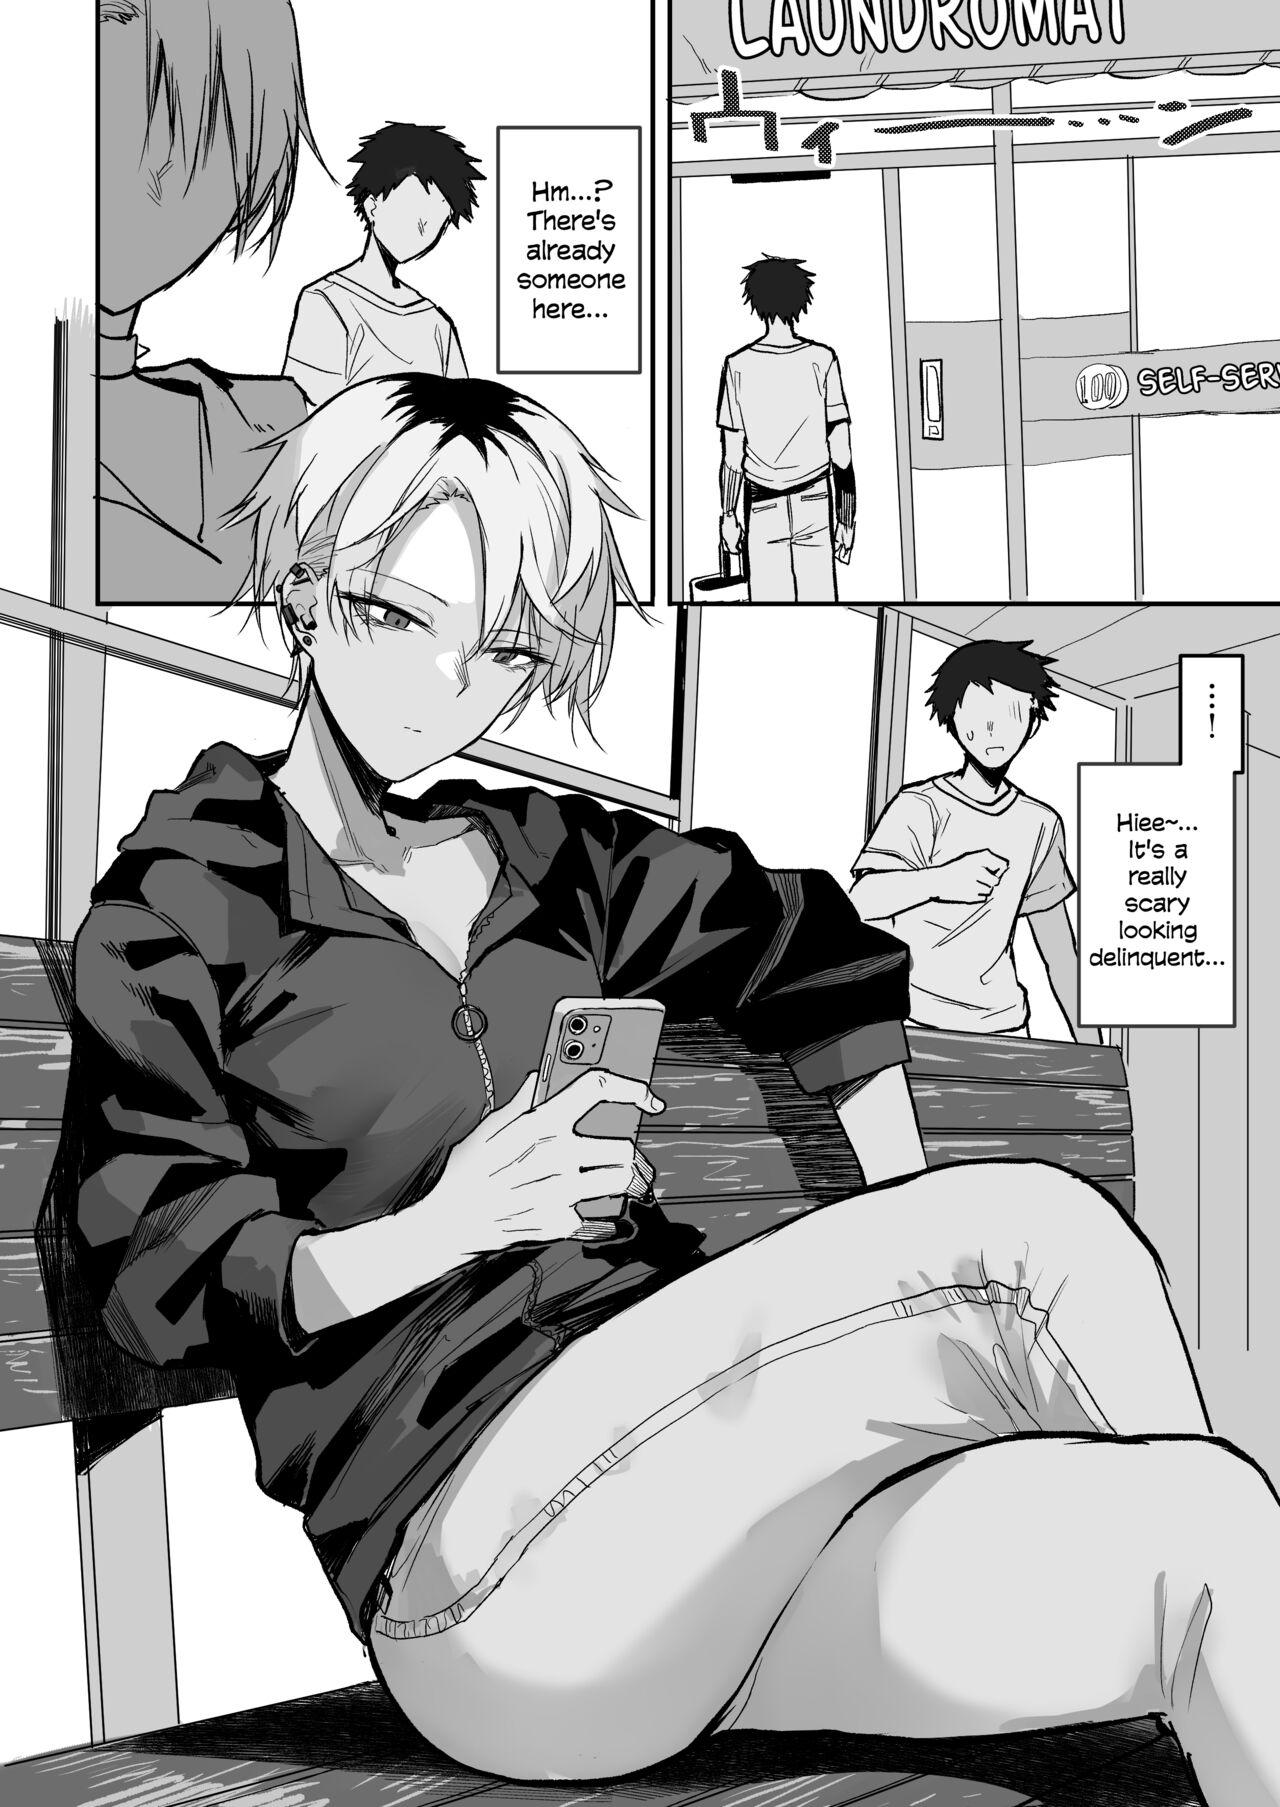 Parody Coin Laundry de Kowai Yankee ni Karamareru Manga | A Manga About Getting Mixed Up With A Scary Delinquent At The Laundromat - Original Fuck For Money - Picture 1